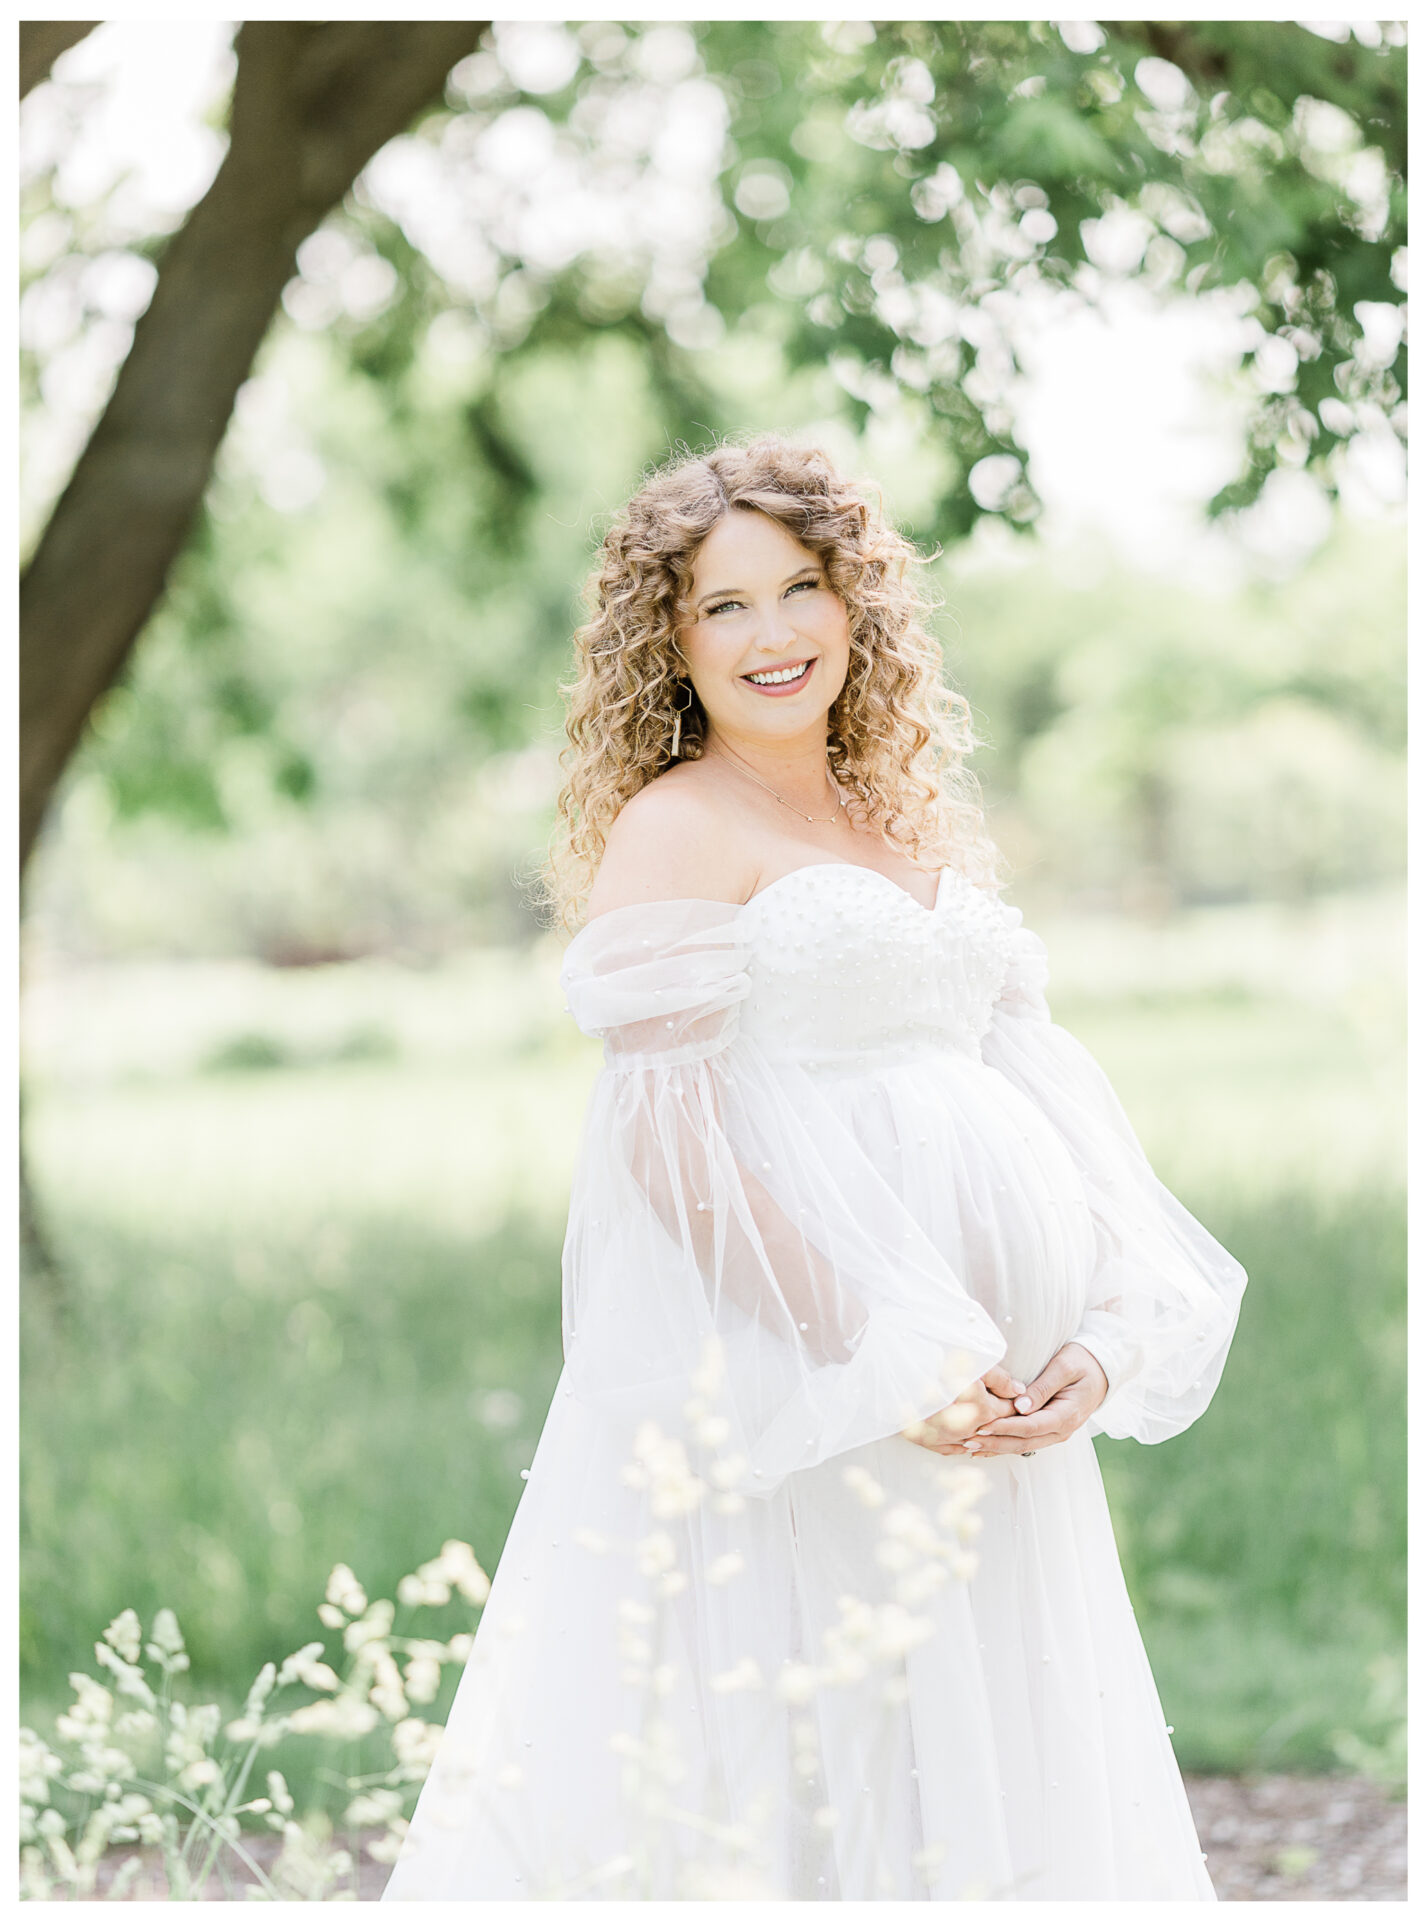 Winter Freire Photography | maternity session outdoors | woman smiling as she is holding her baby bump